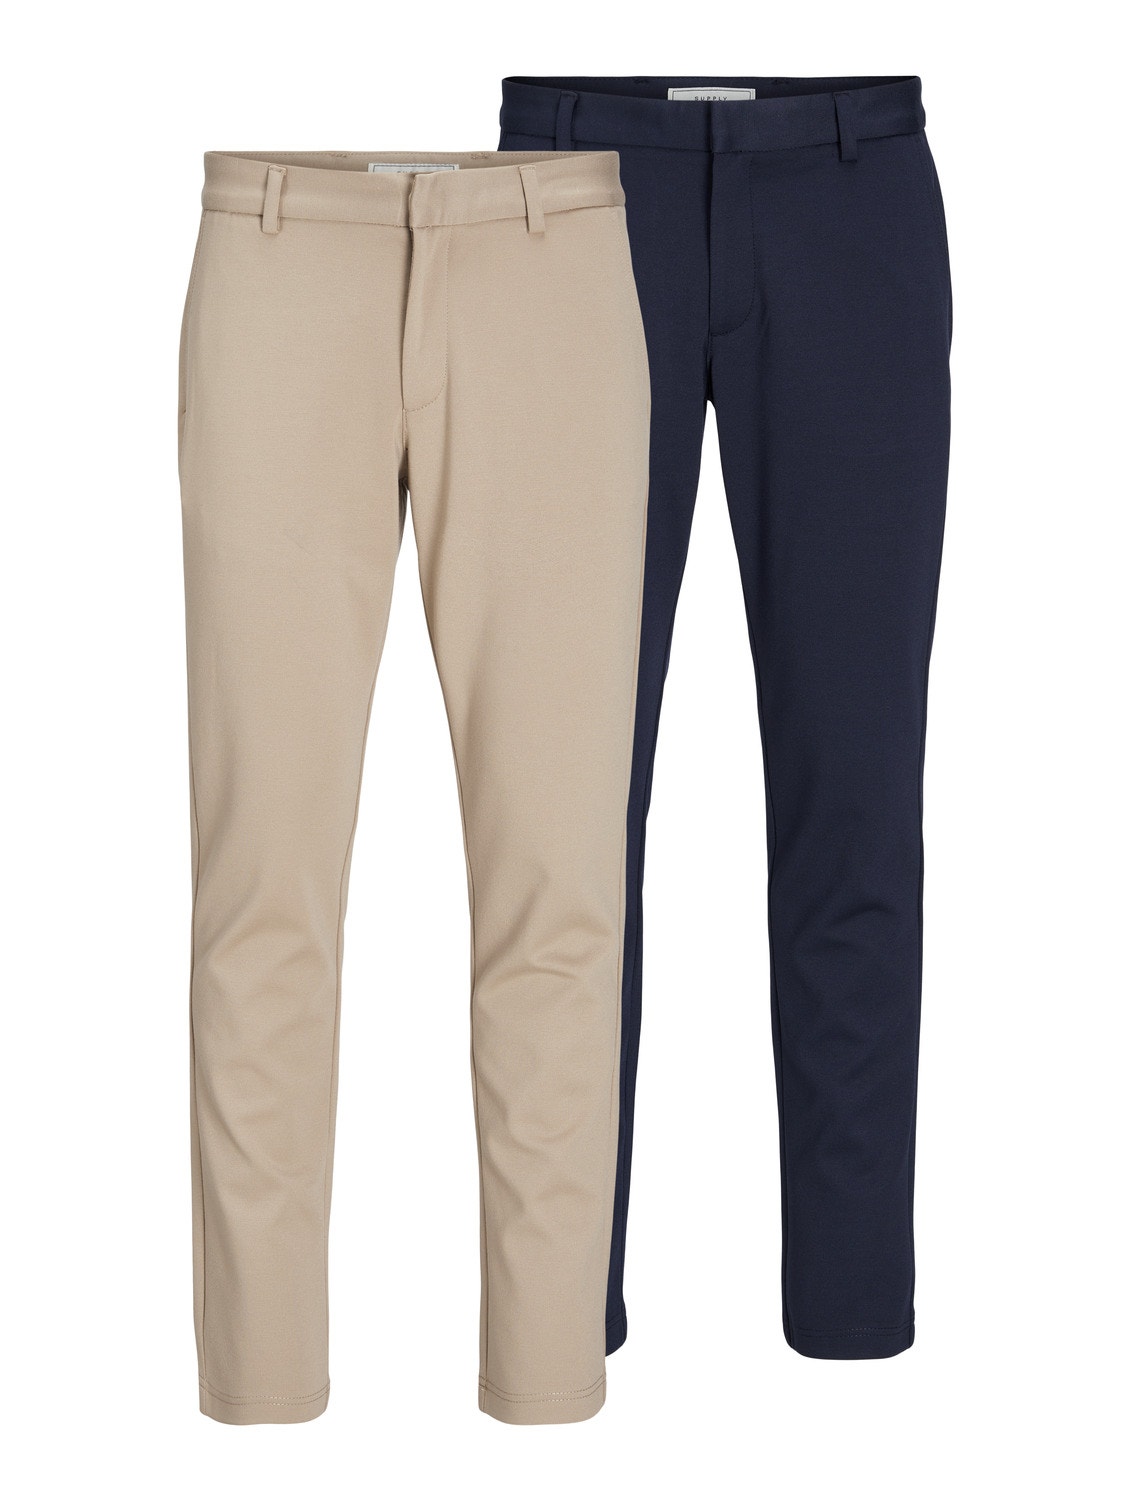 2-pack Slim Fit Chino trousers with 40% discount! | Jack & Jones®